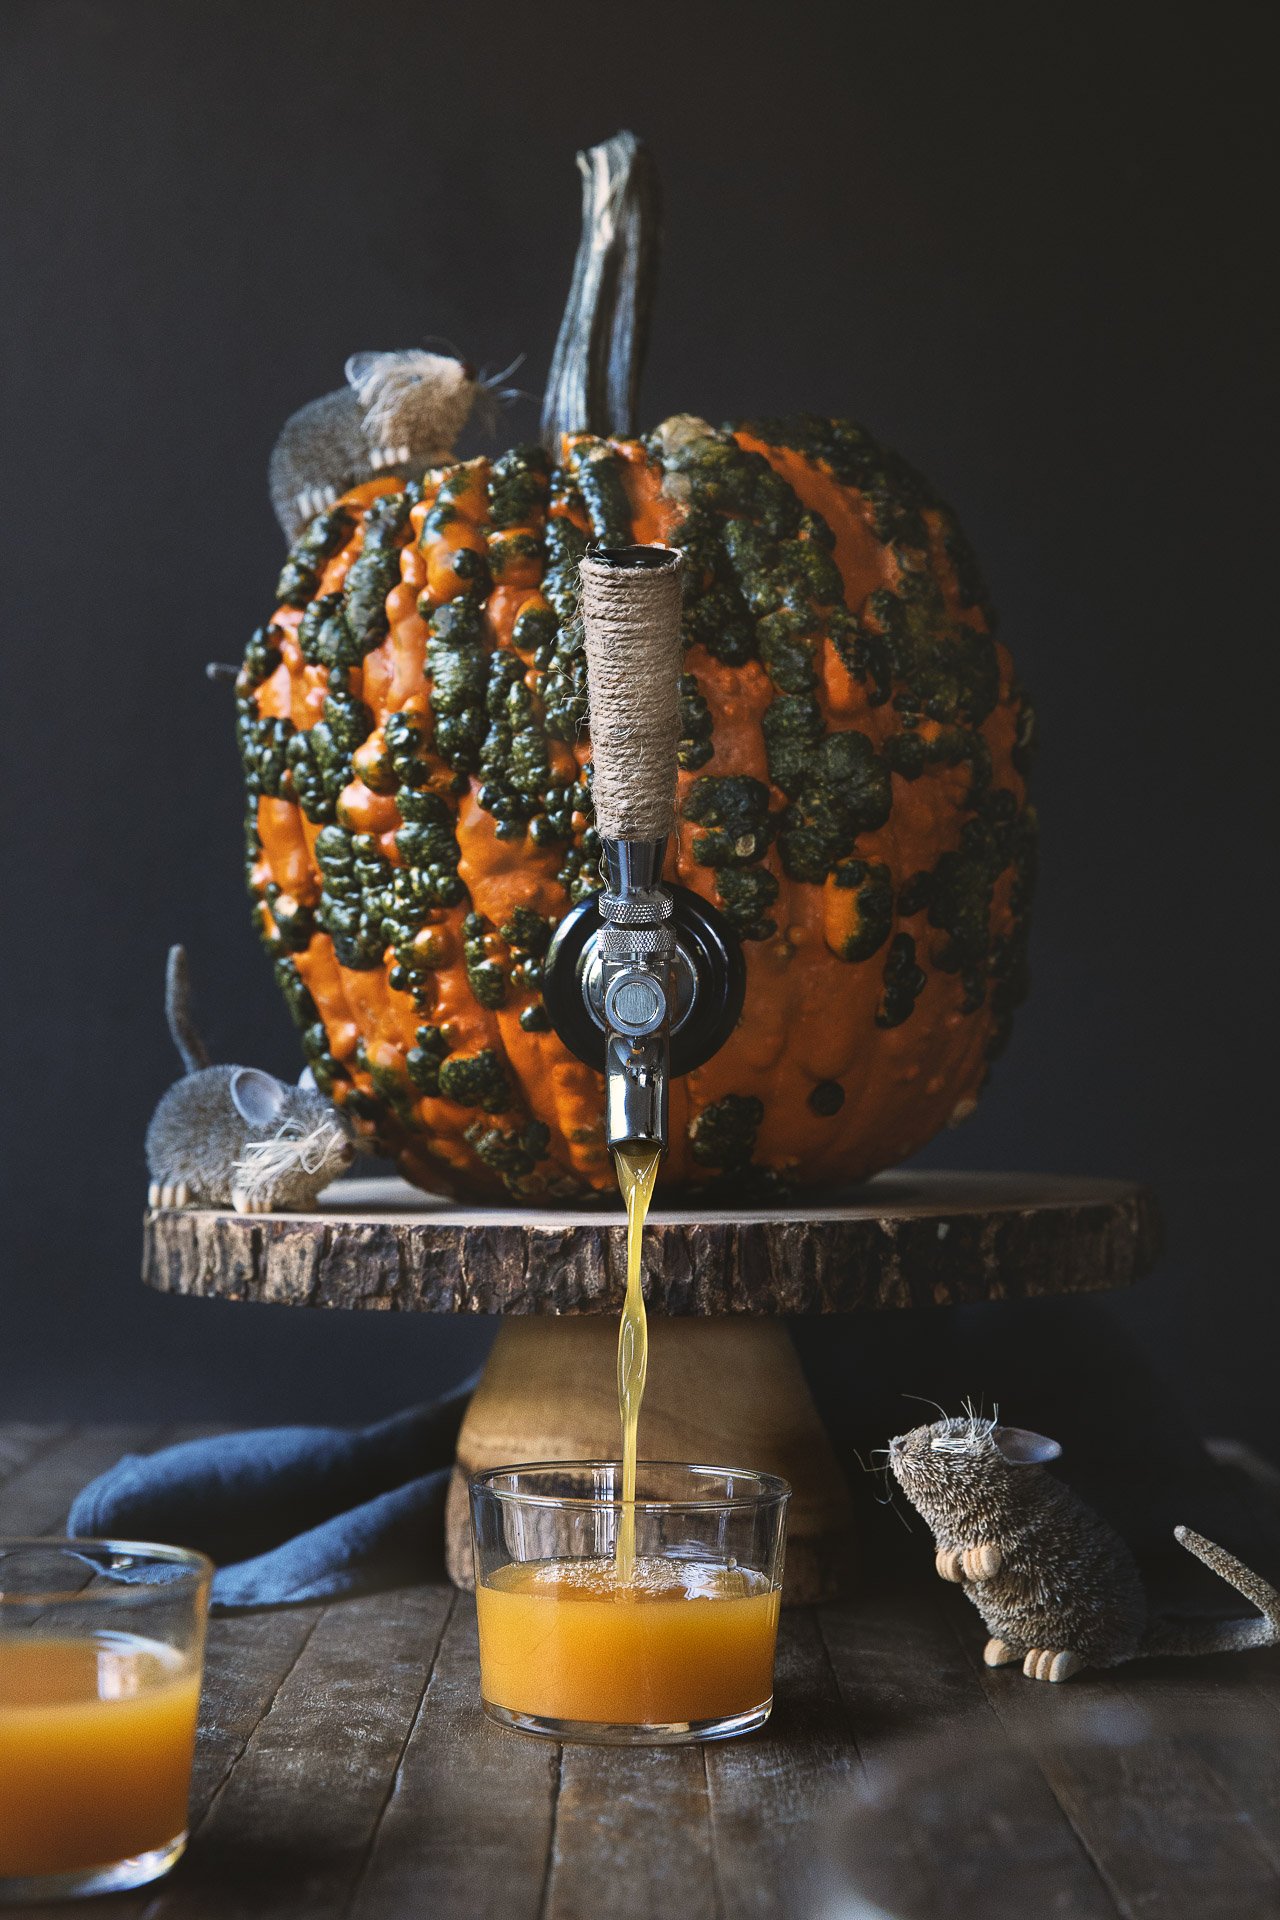 Make your own pumpkin keg for your next Halloween party!